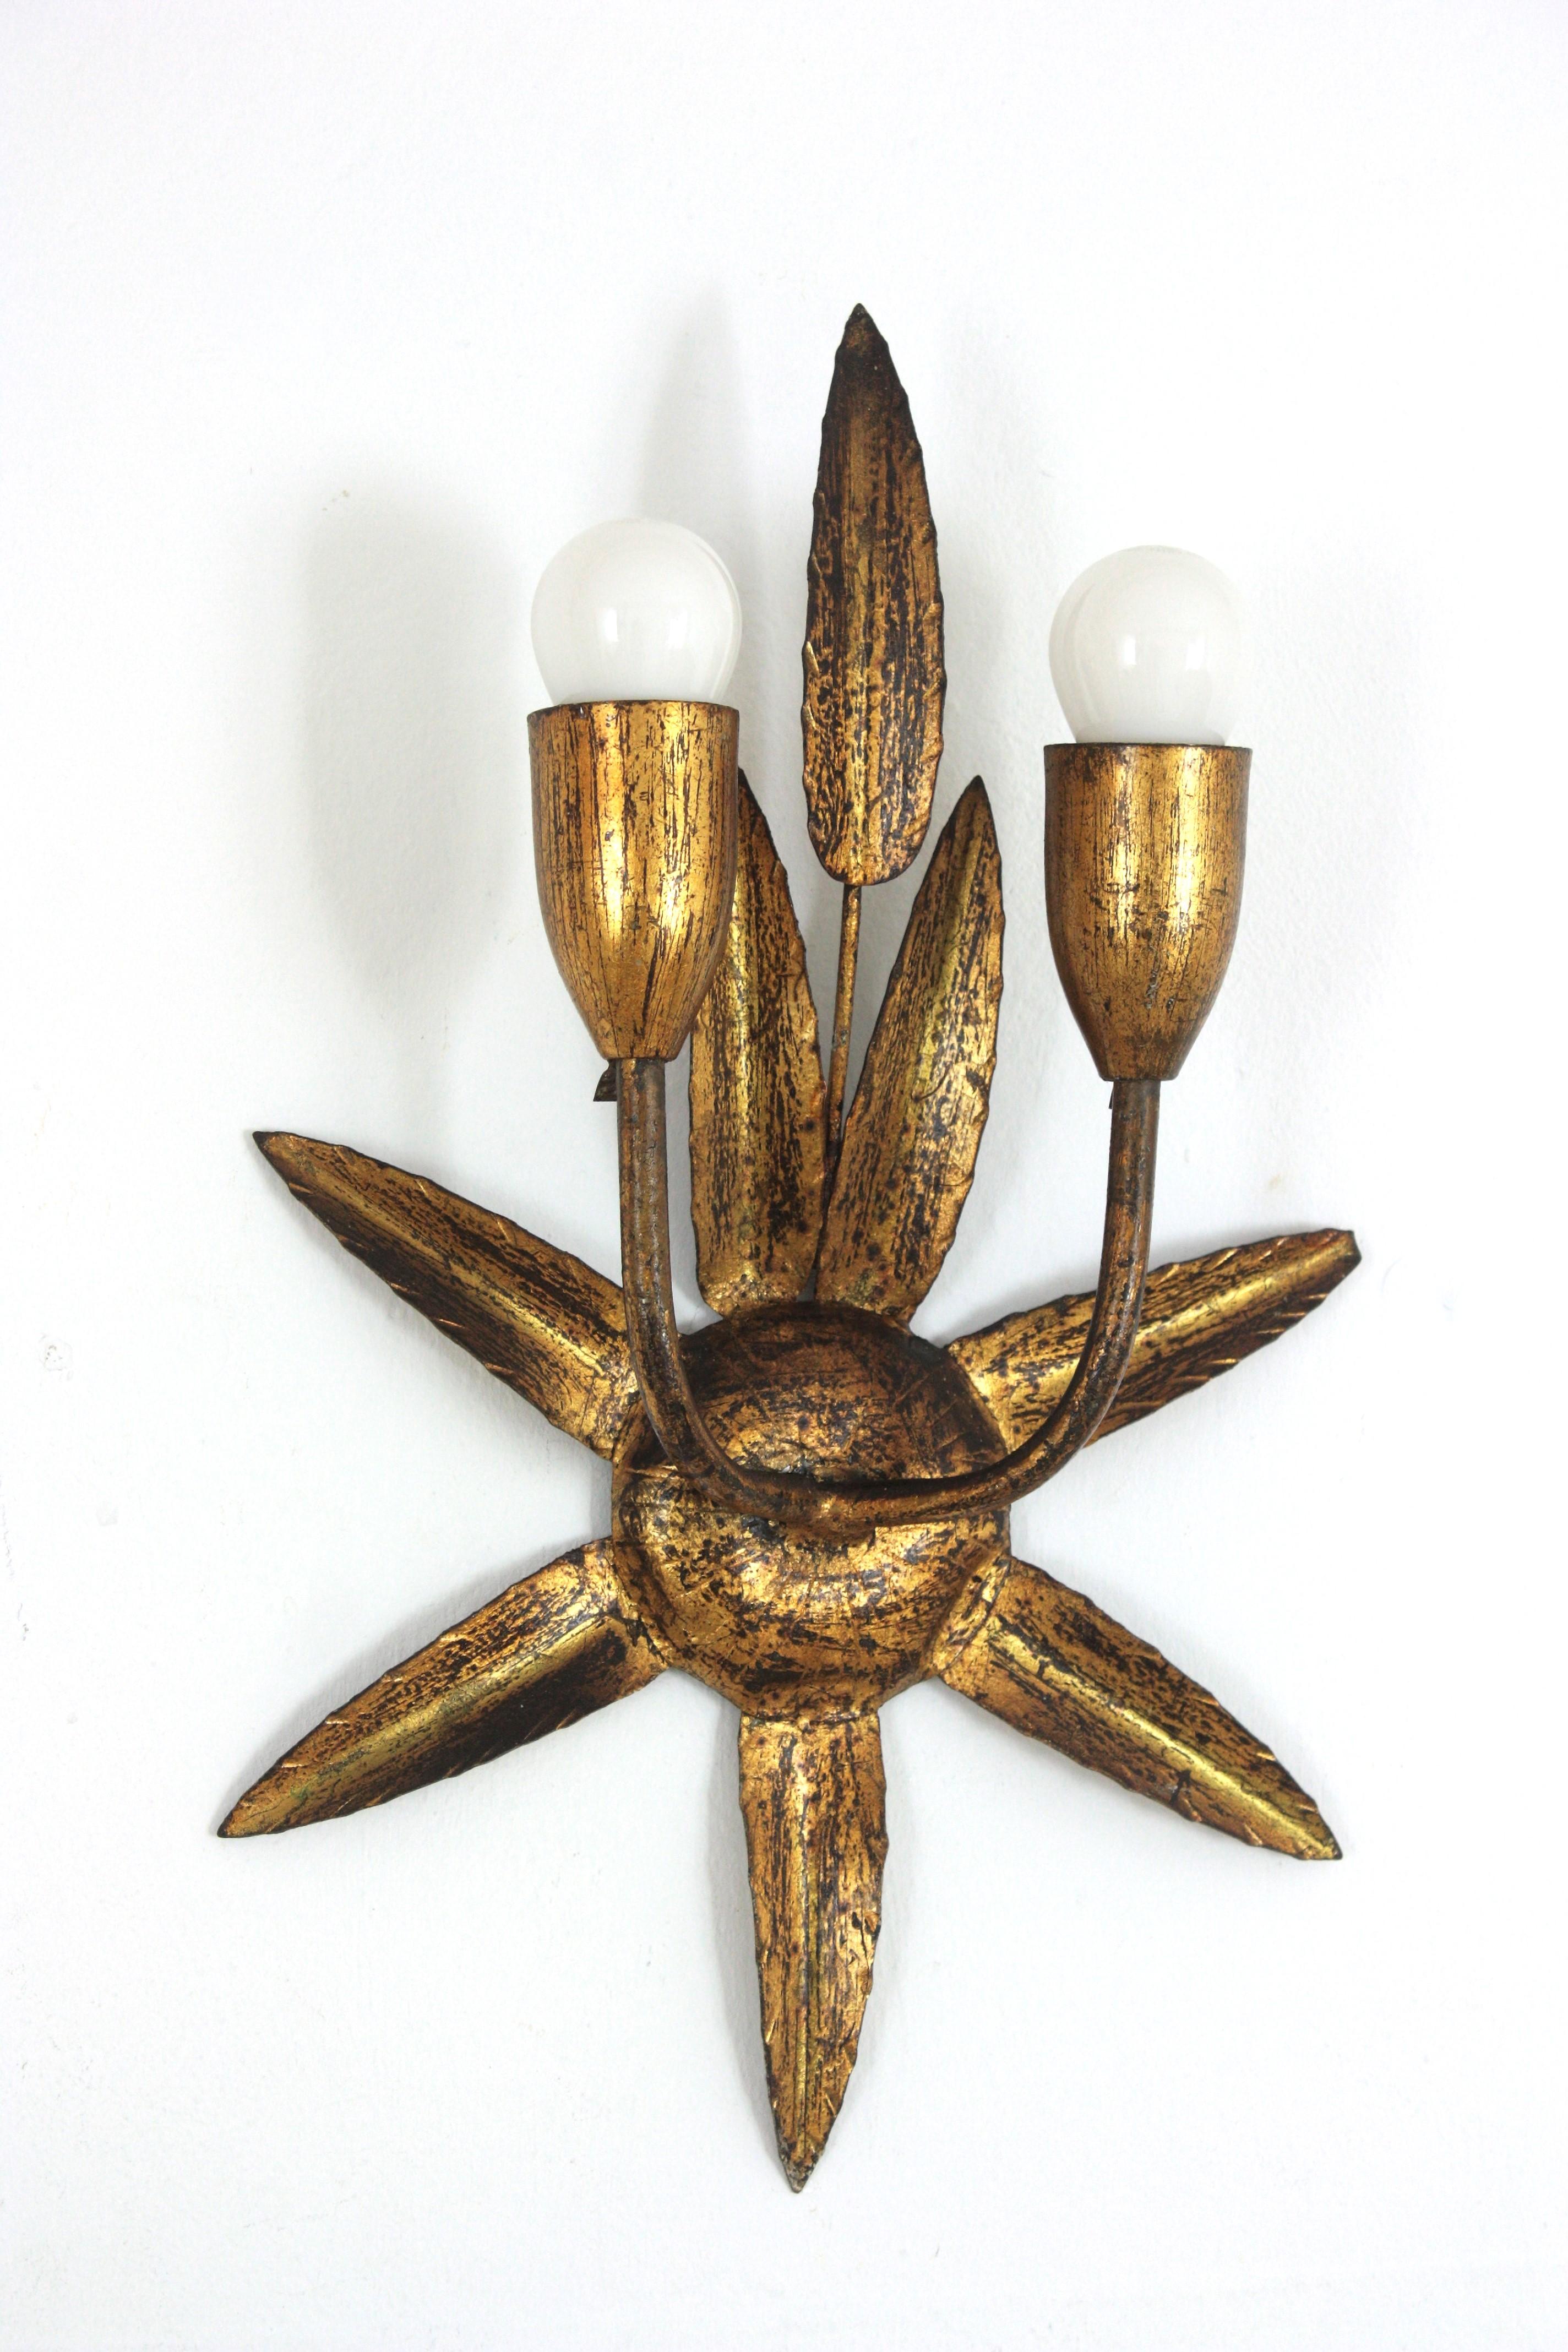 Spanish Gilt Iron Wall Sconce with Foliage Design and Starburst Backplate, 1950s In Good Condition For Sale In Barcelona, ES